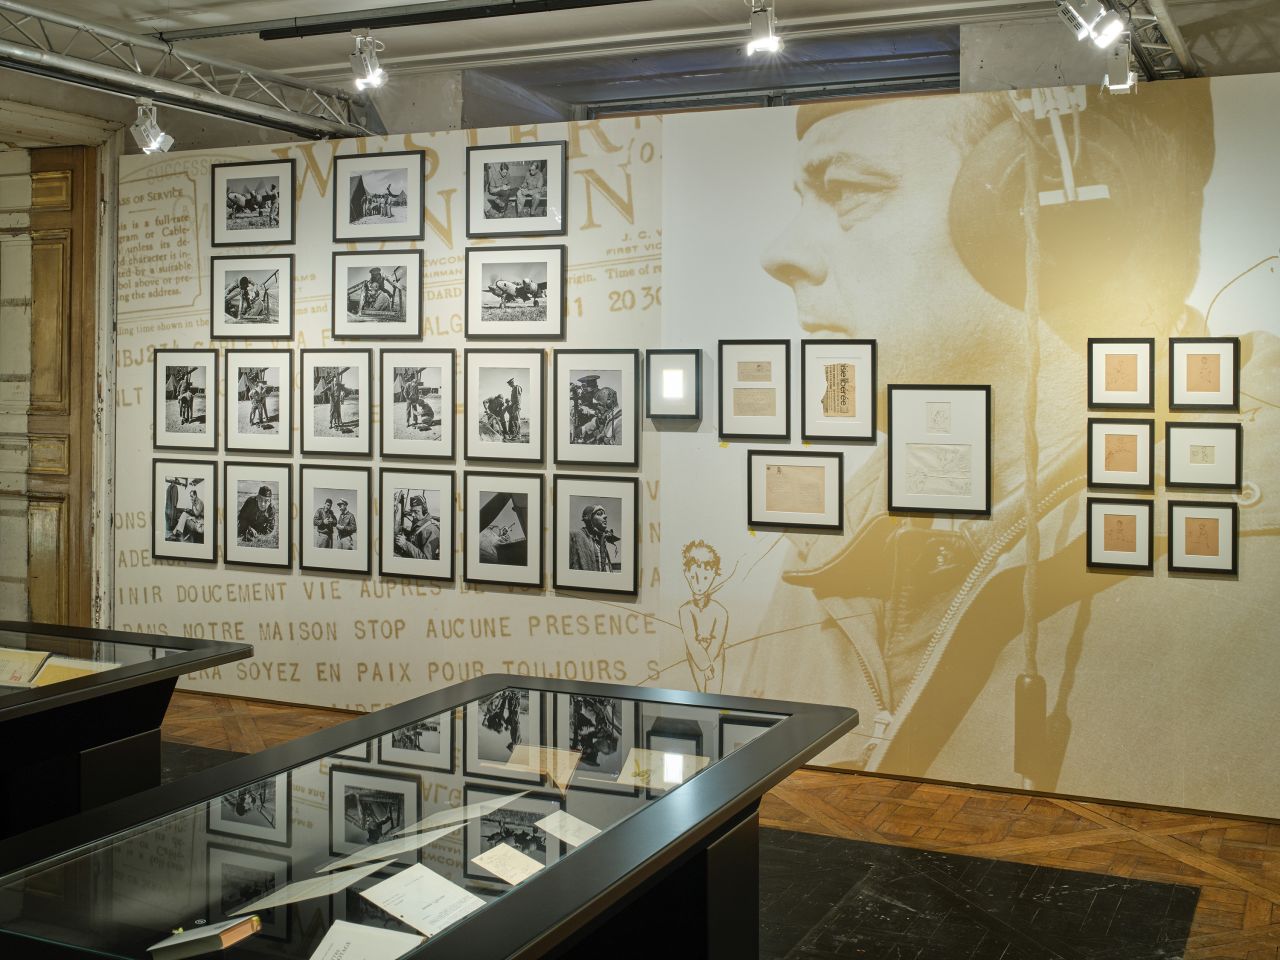 Photographs, poems and newspaper cuttings about the book are featured in the exhibition.